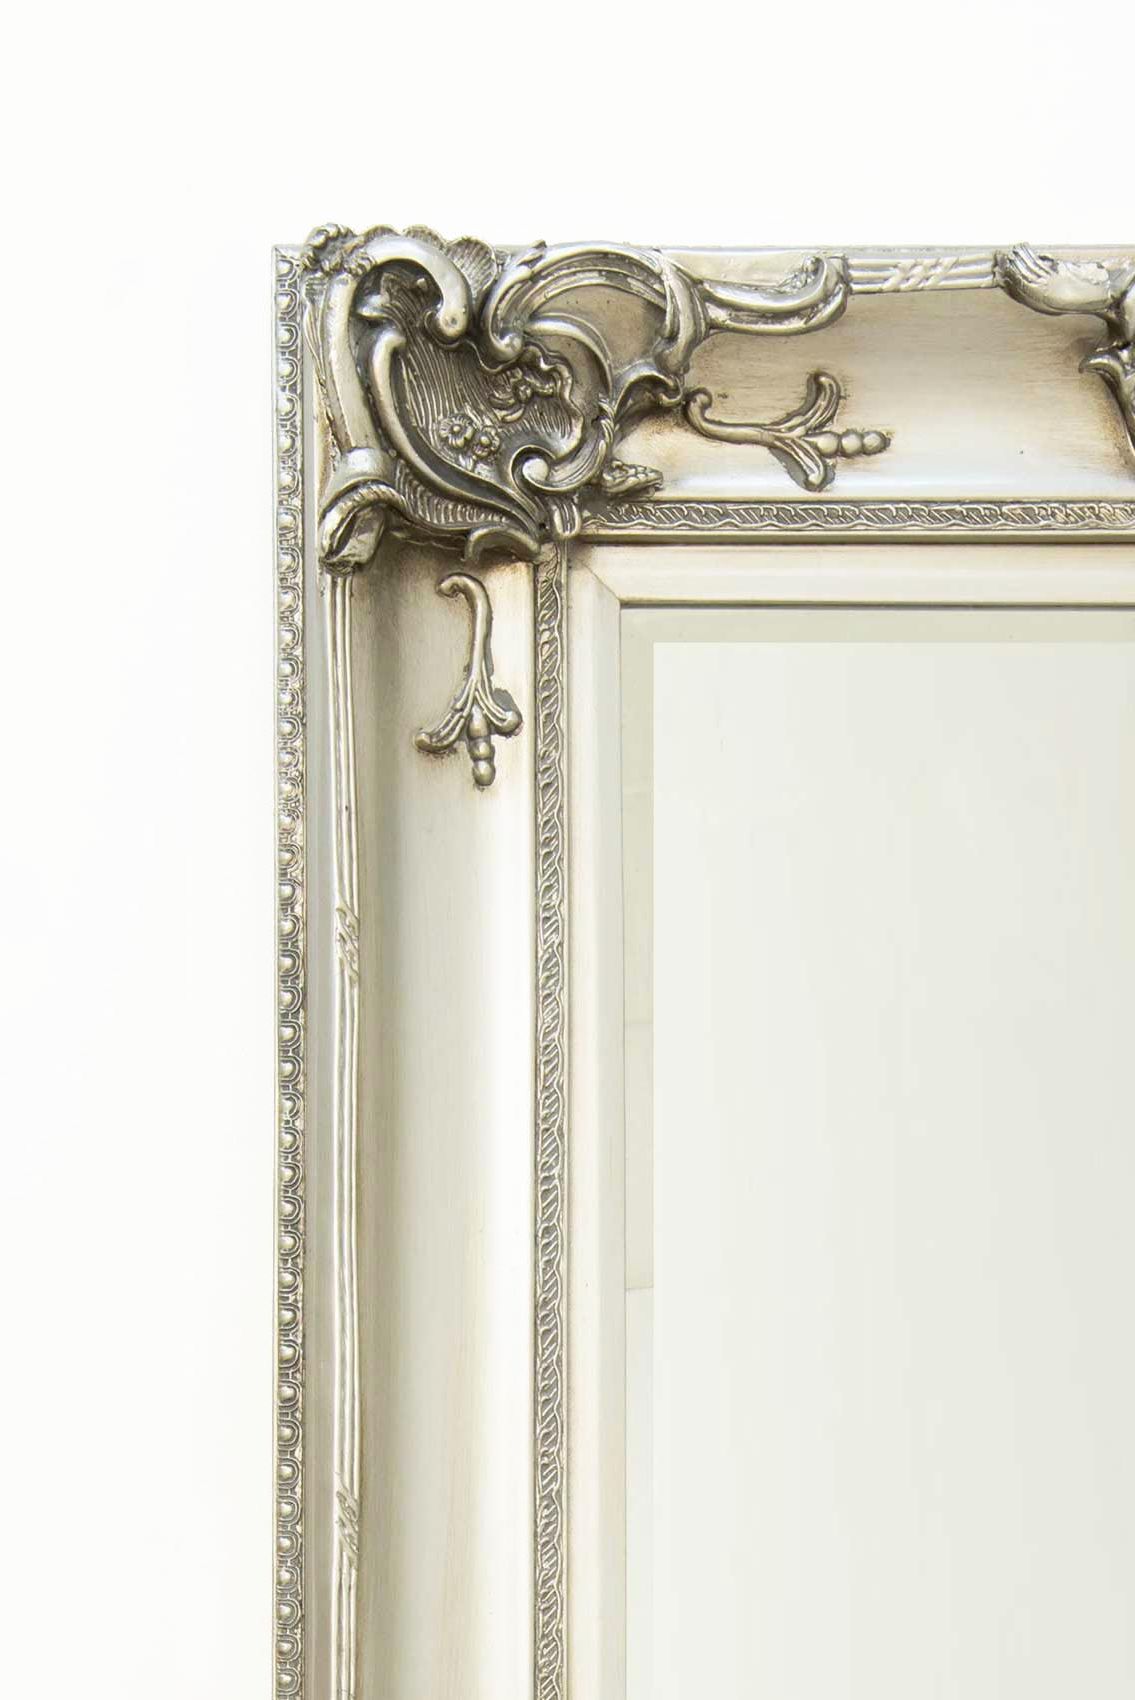 Most Recently Released Beautiful Large Silver Decorative Ornate Wall Mirror 6ft X 3ft 183 X Throughout Silver Decorative Wall Mirrors (View 13 of 15)